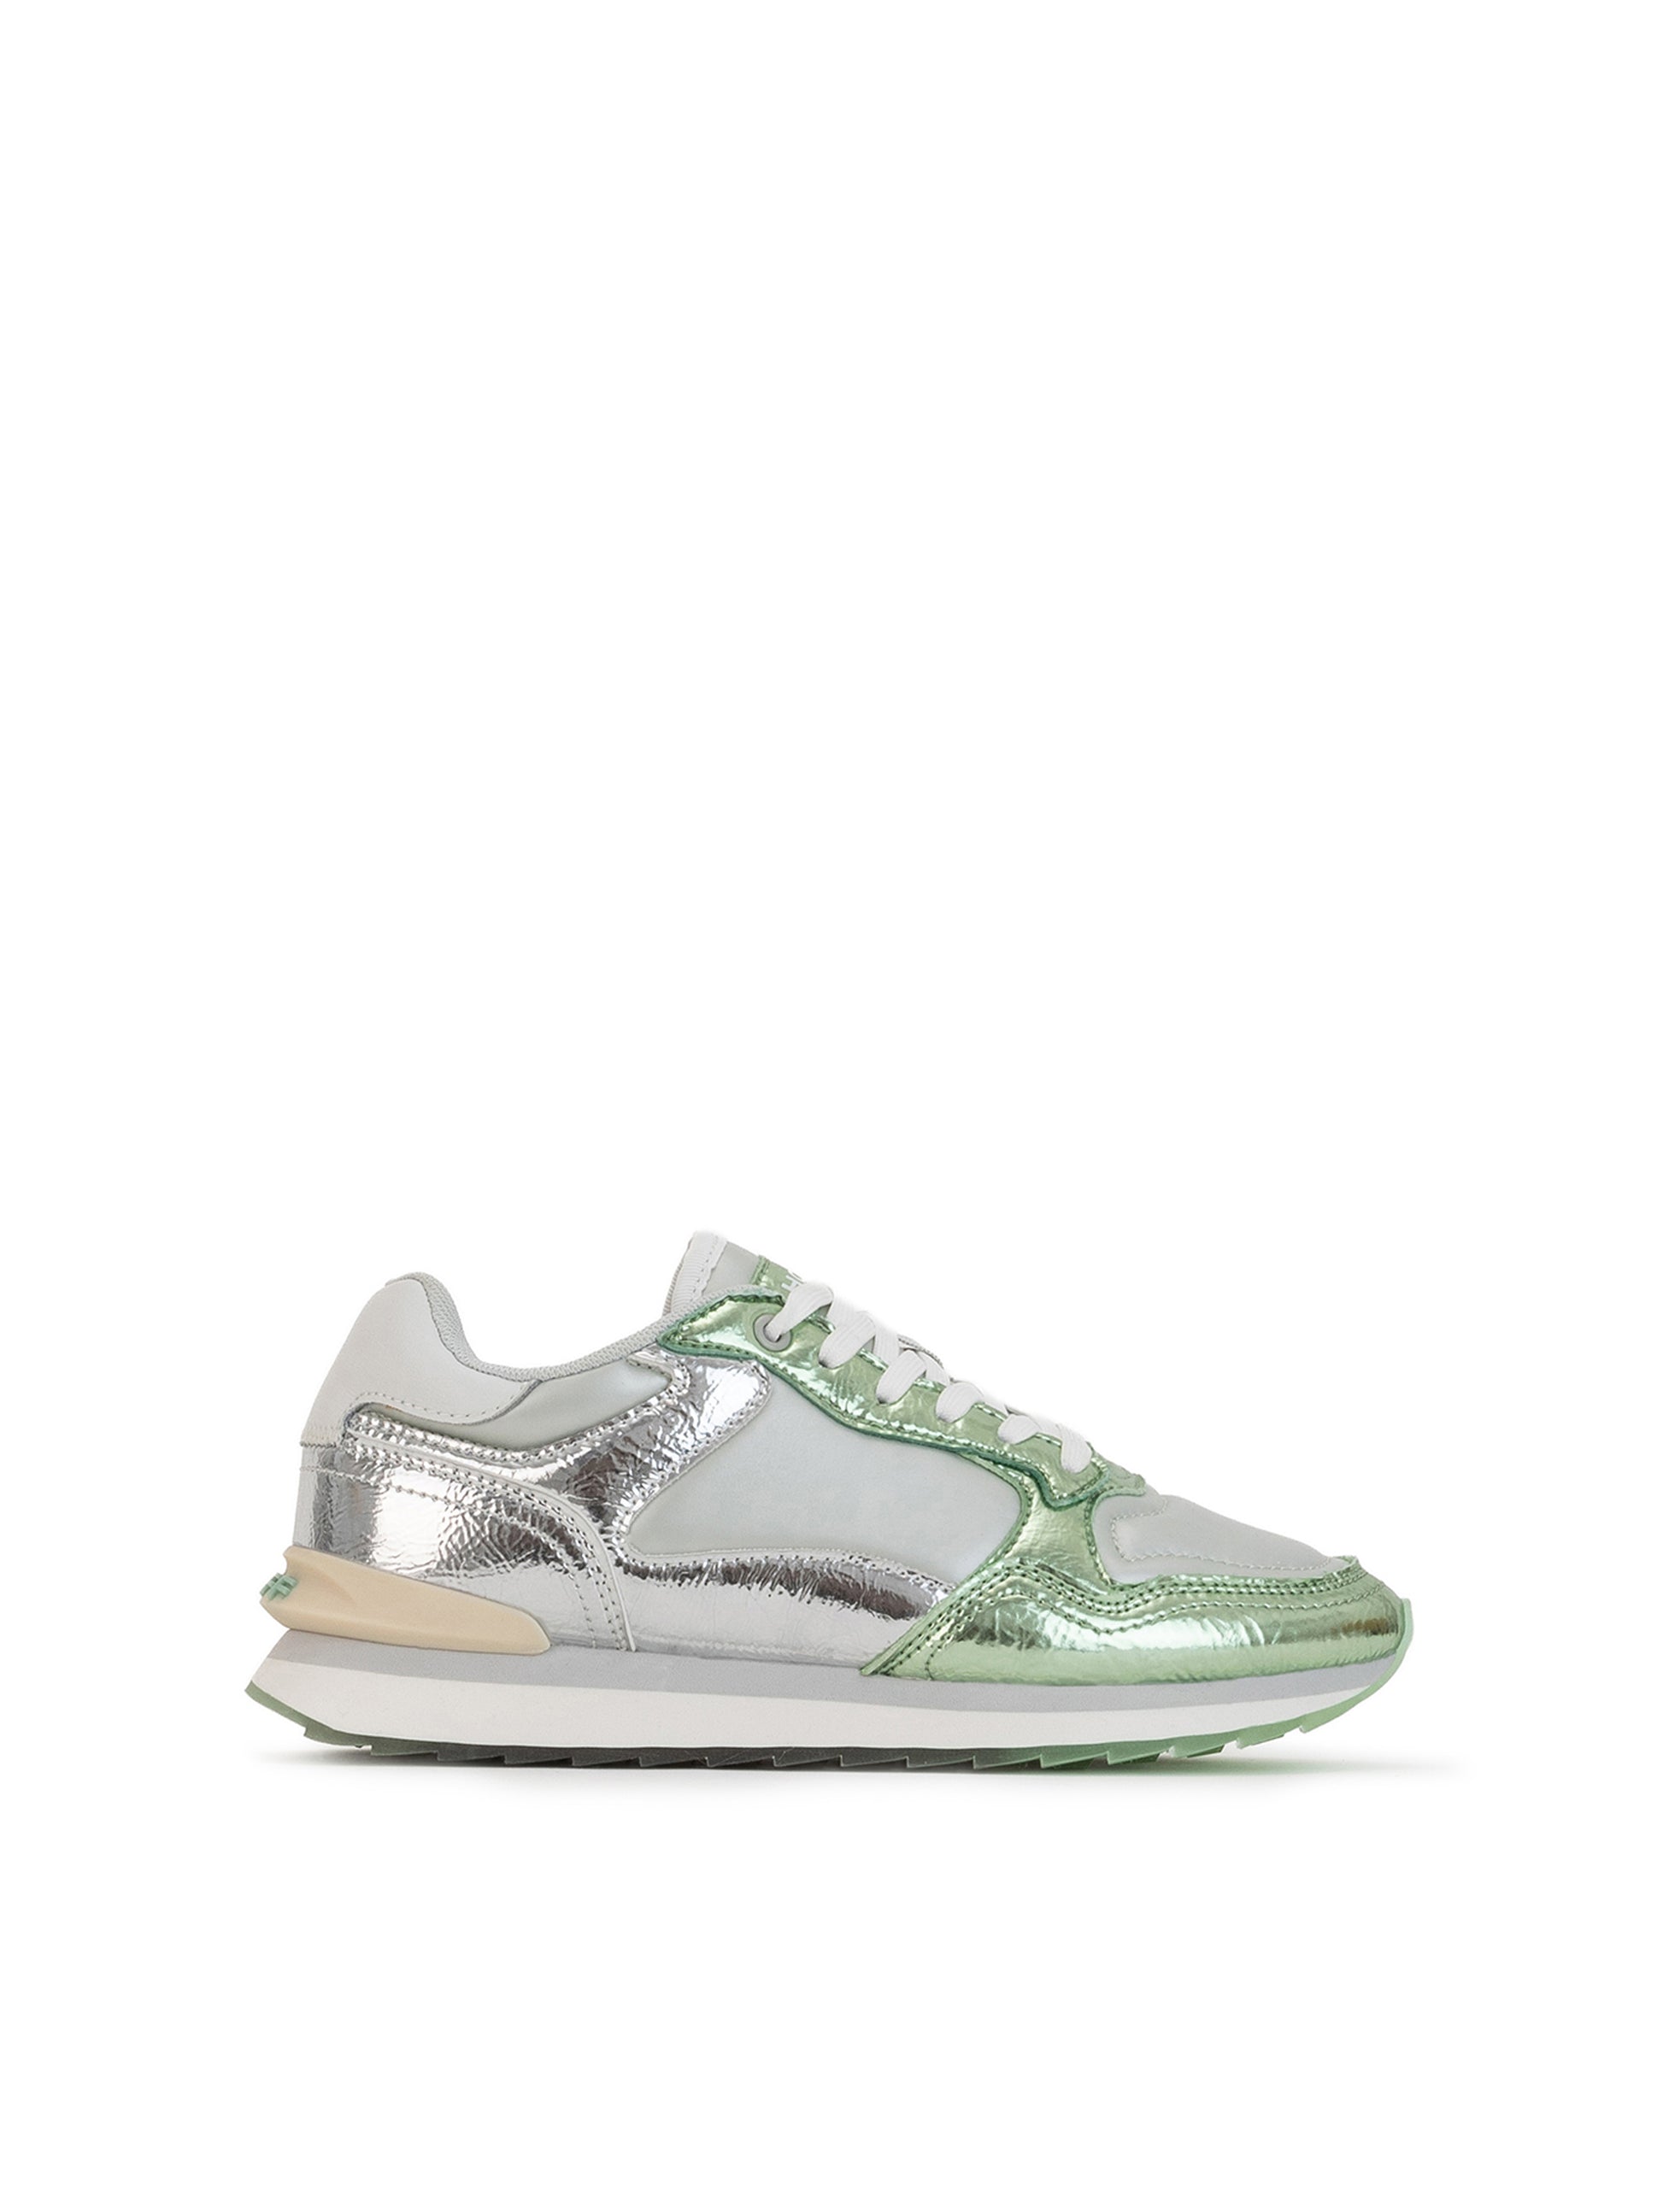 Conker Boutqiue Hoff Iron Green and Silver Trainer side view